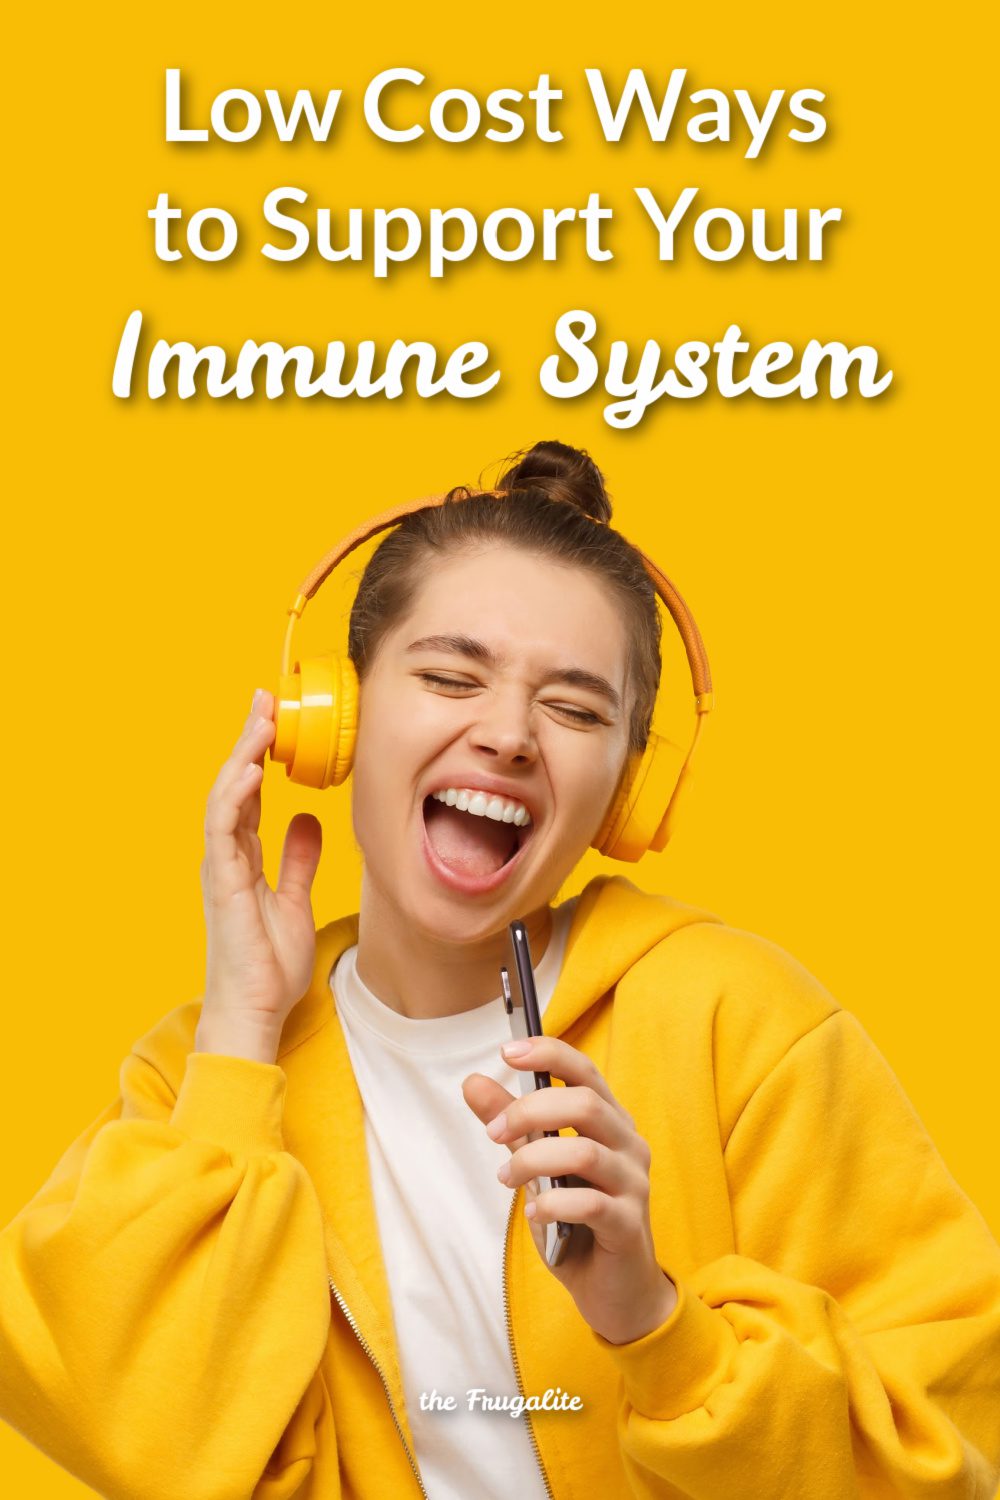 7 Low Cost Ways to Support Your Immune System